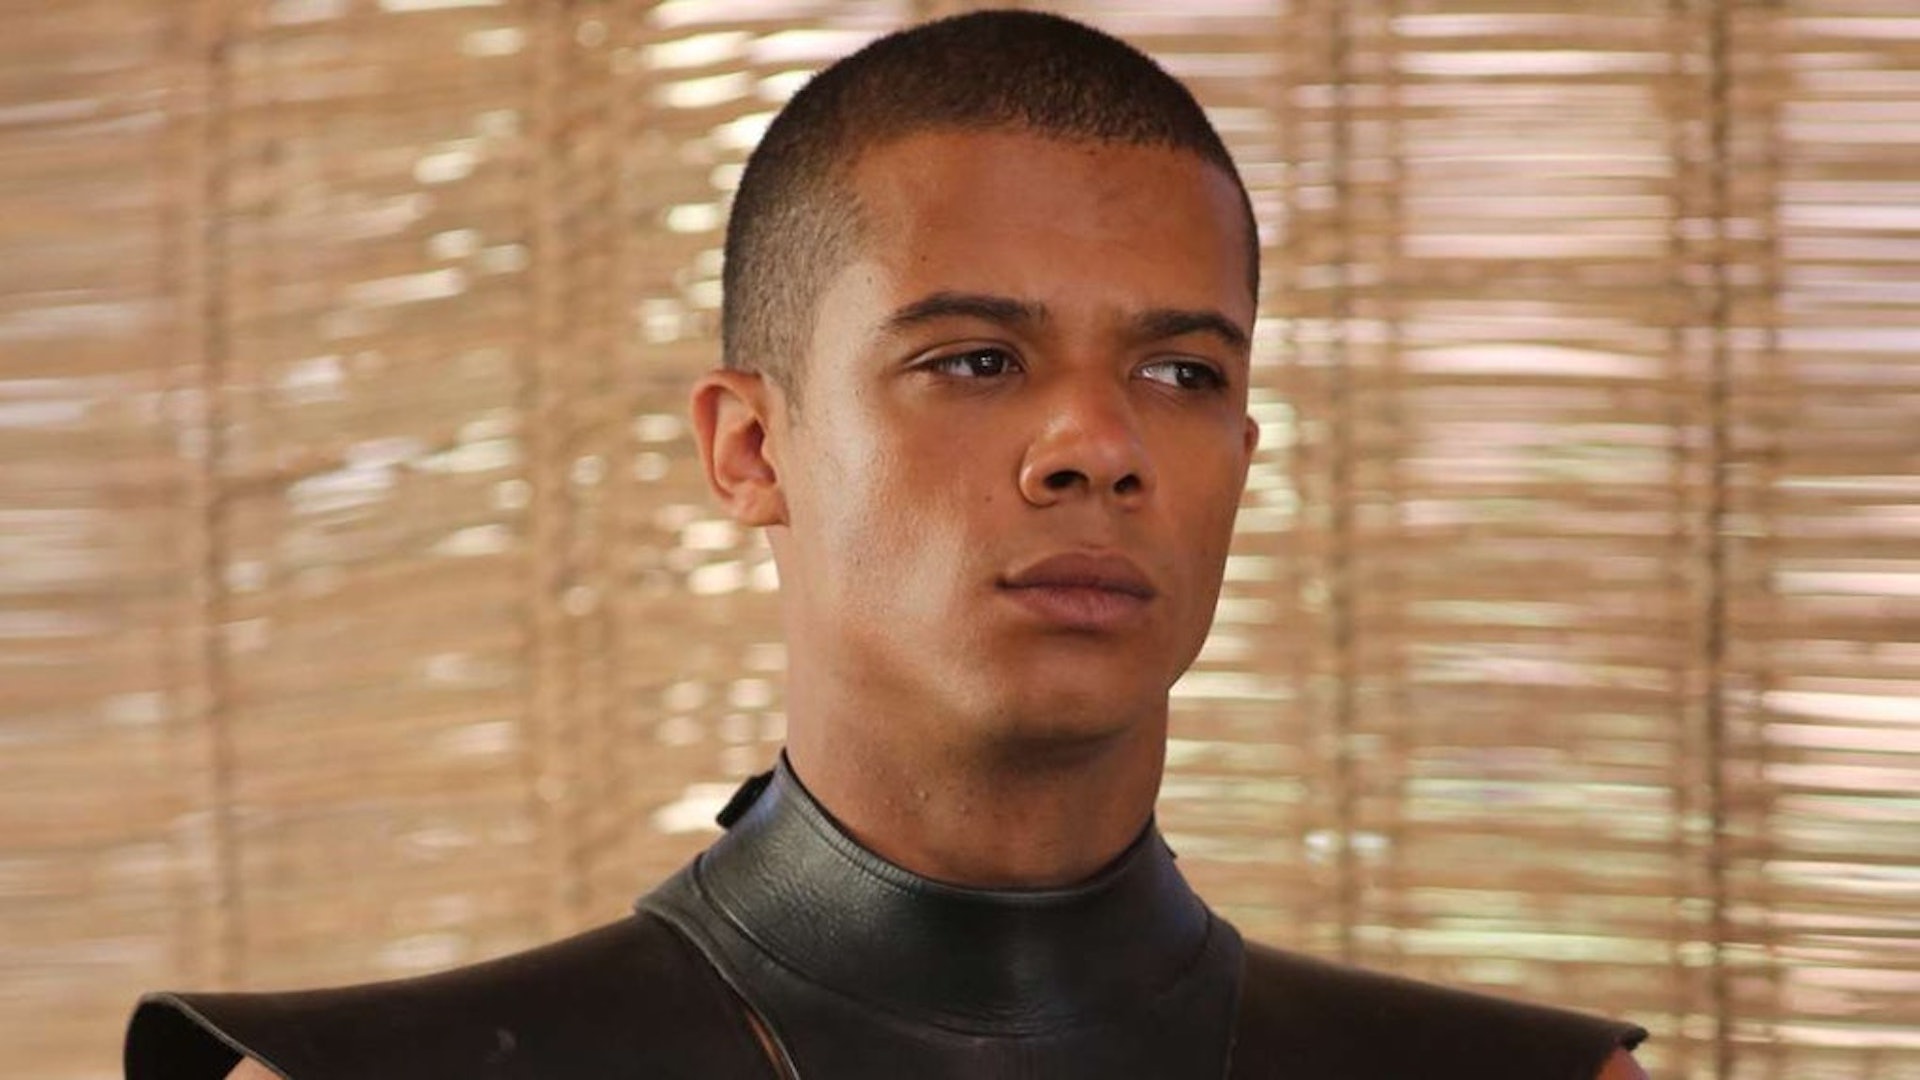 Jacob Anderson, Interview with the vampire series, Game of Thrones, Gamesradar, 1920x1080 Full HD Desktop